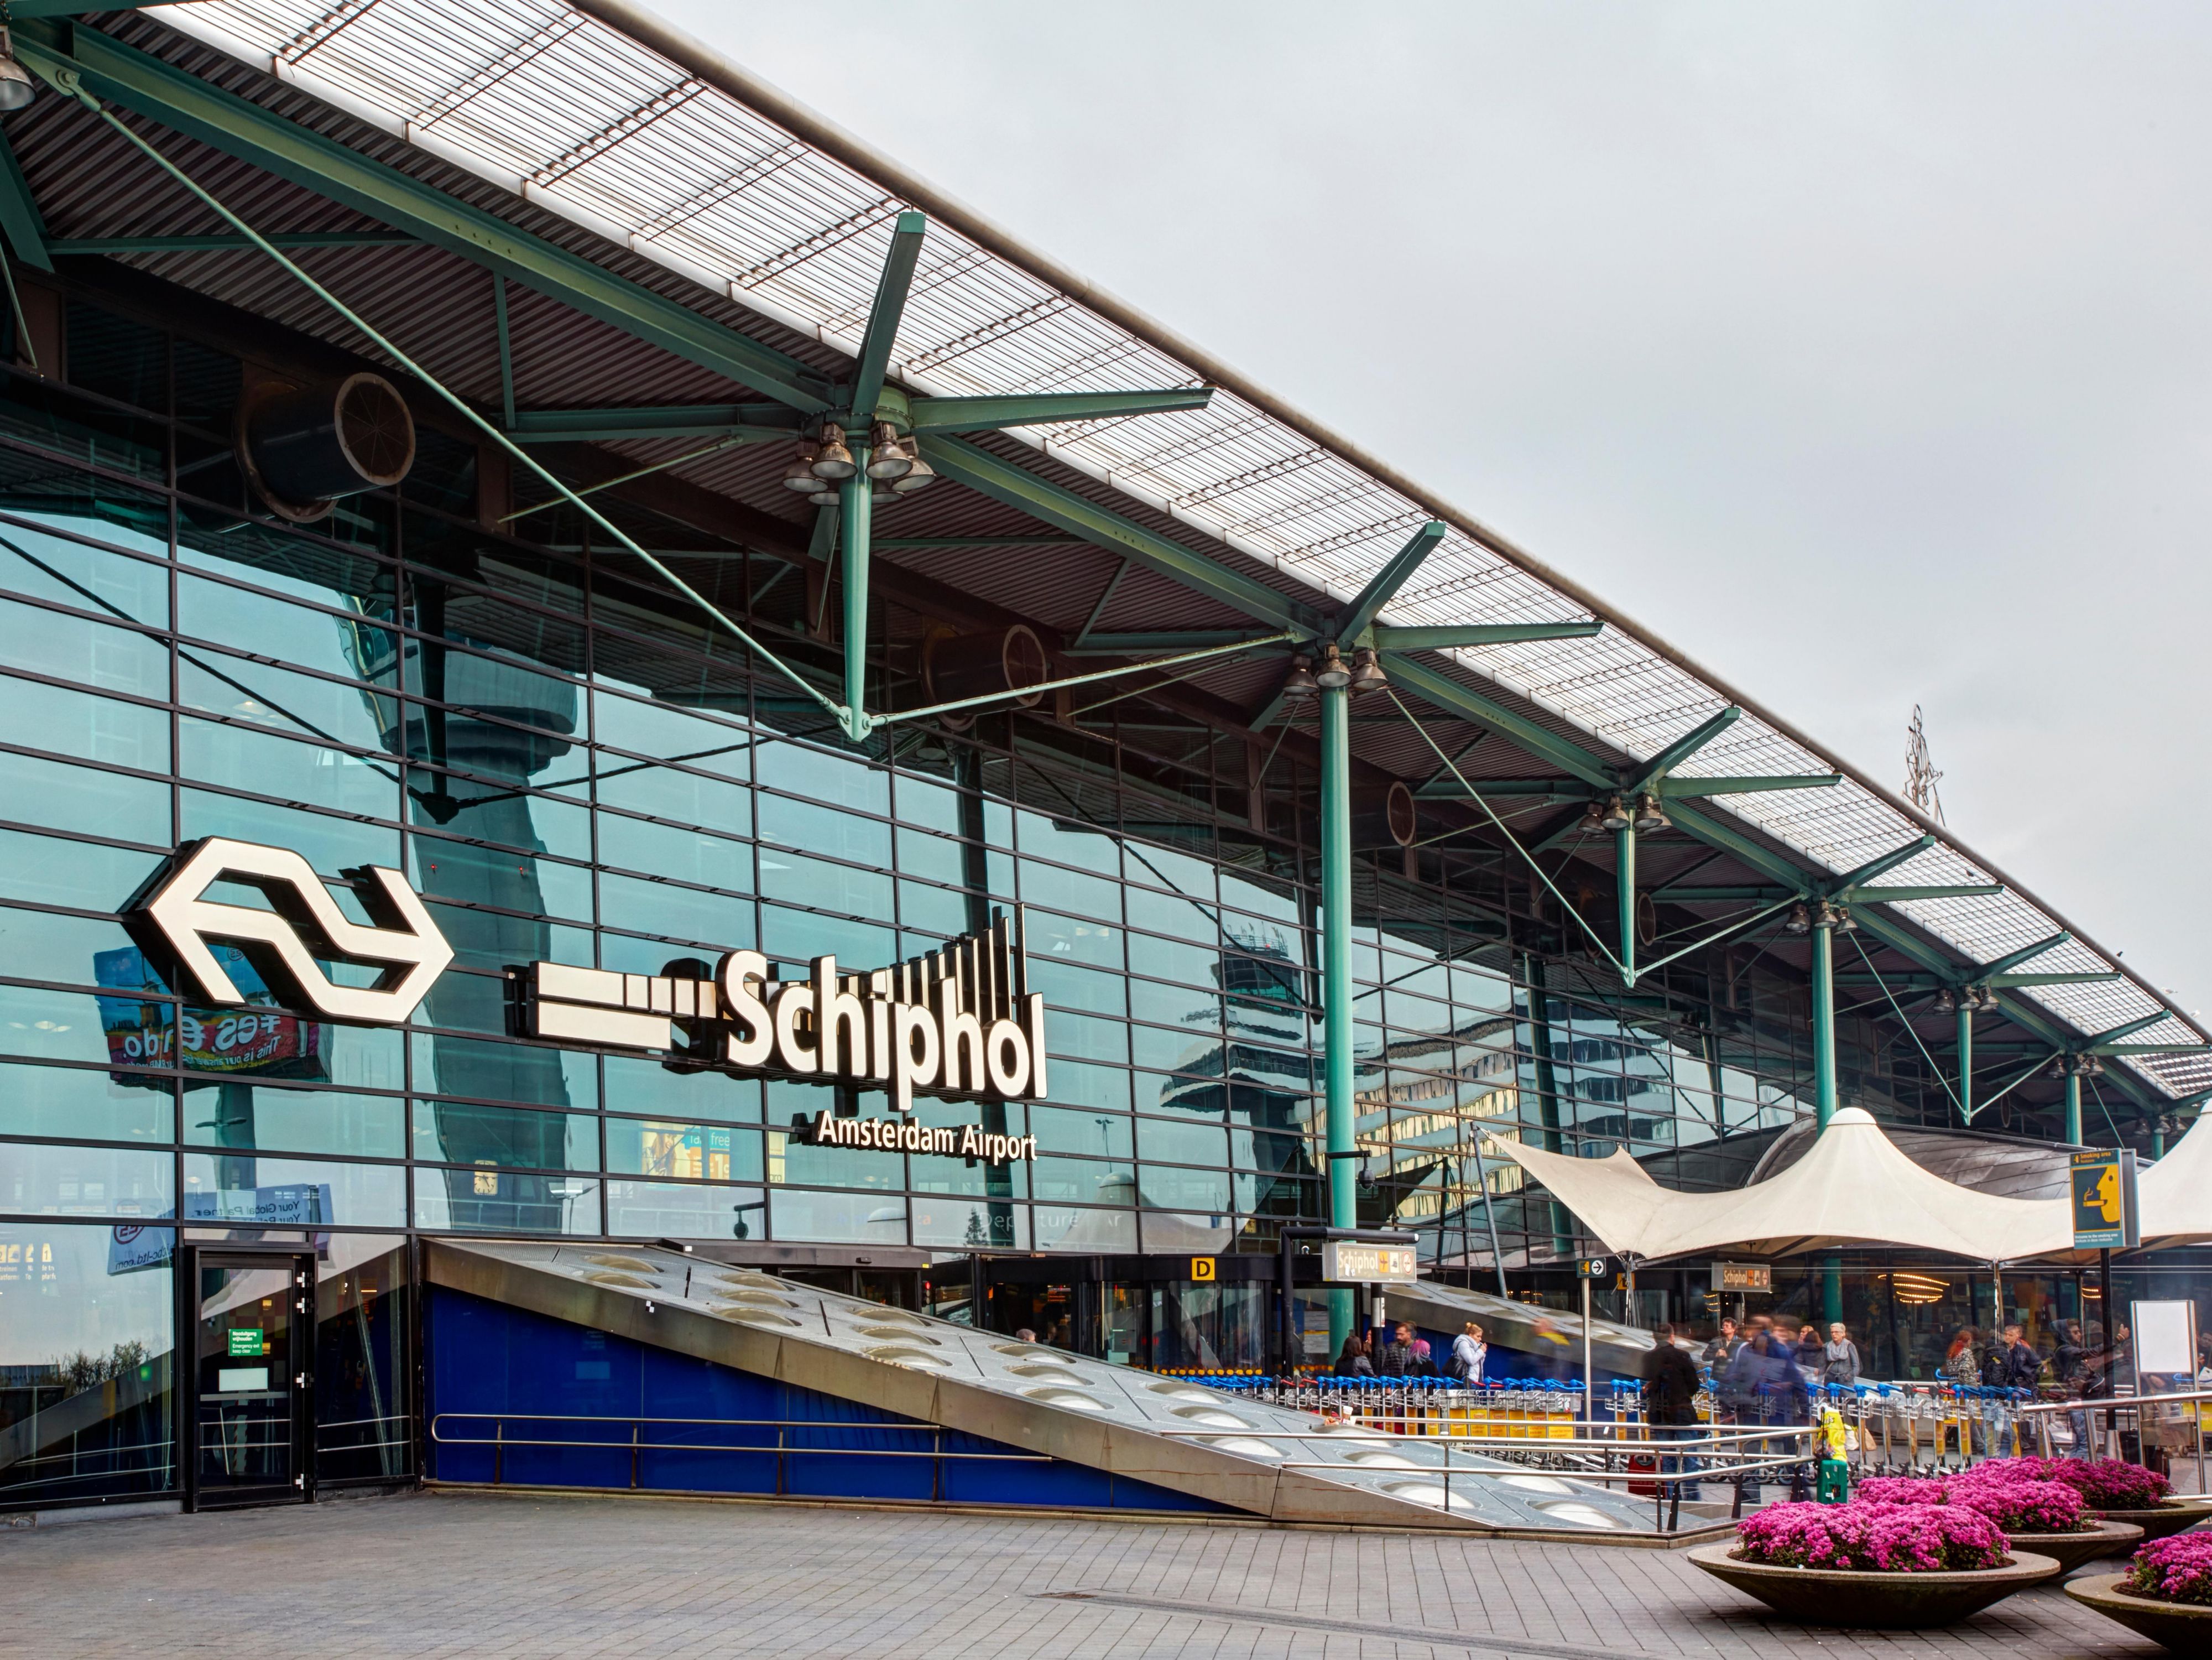 Amsterdam Airport Schiphol is just 10 minutes away from us